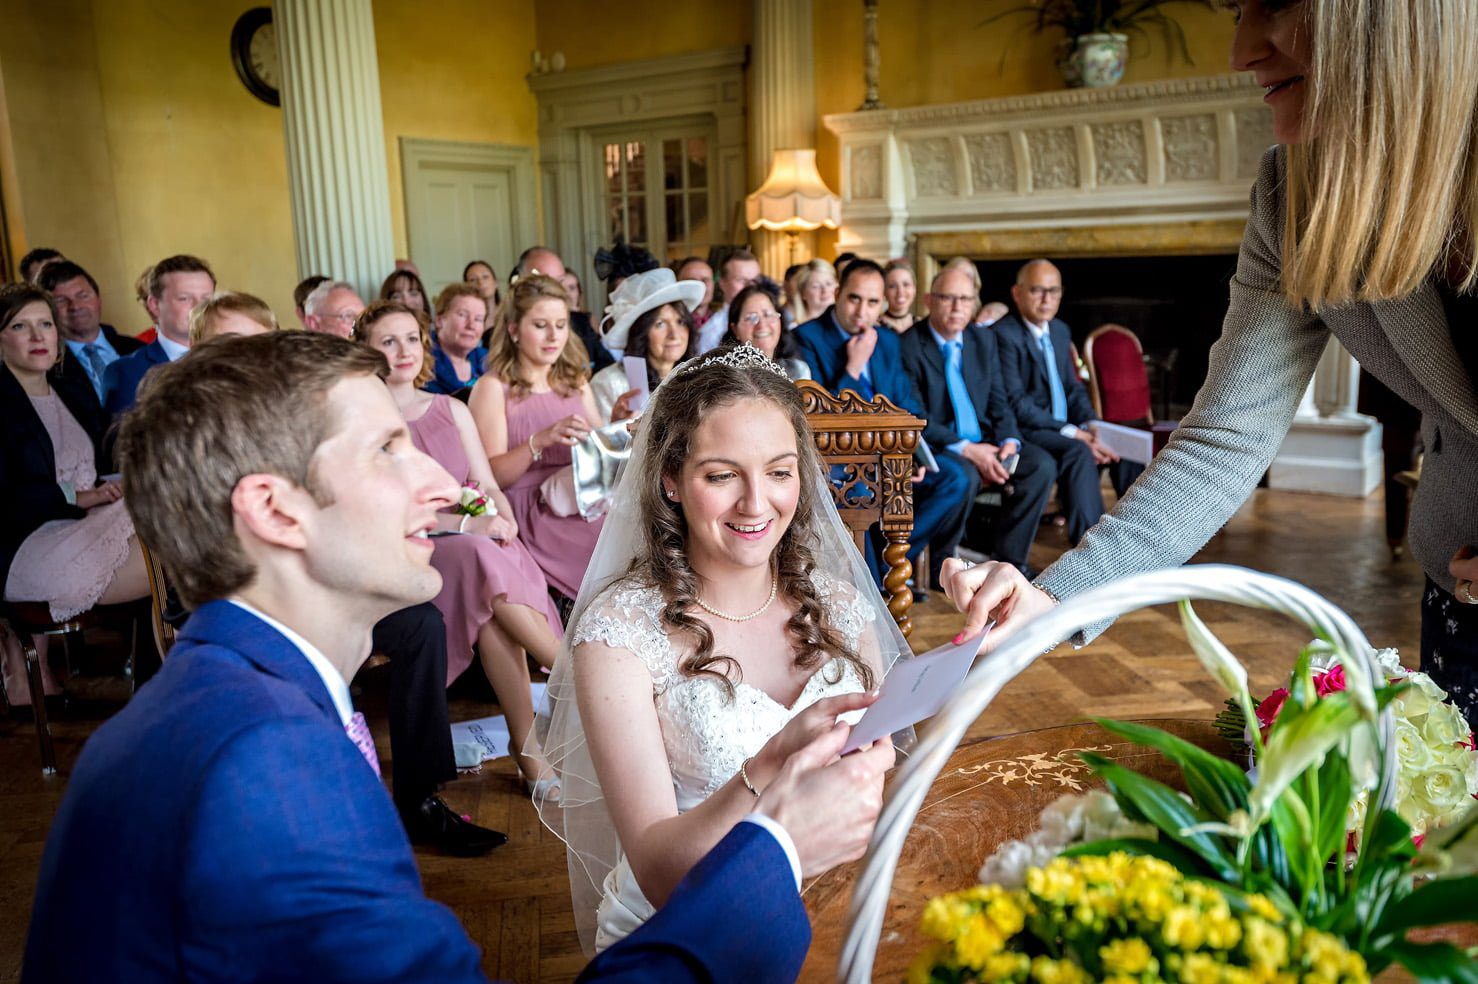 Registrar hands the marriage certificate to the couple after their vows at Hampton Court House